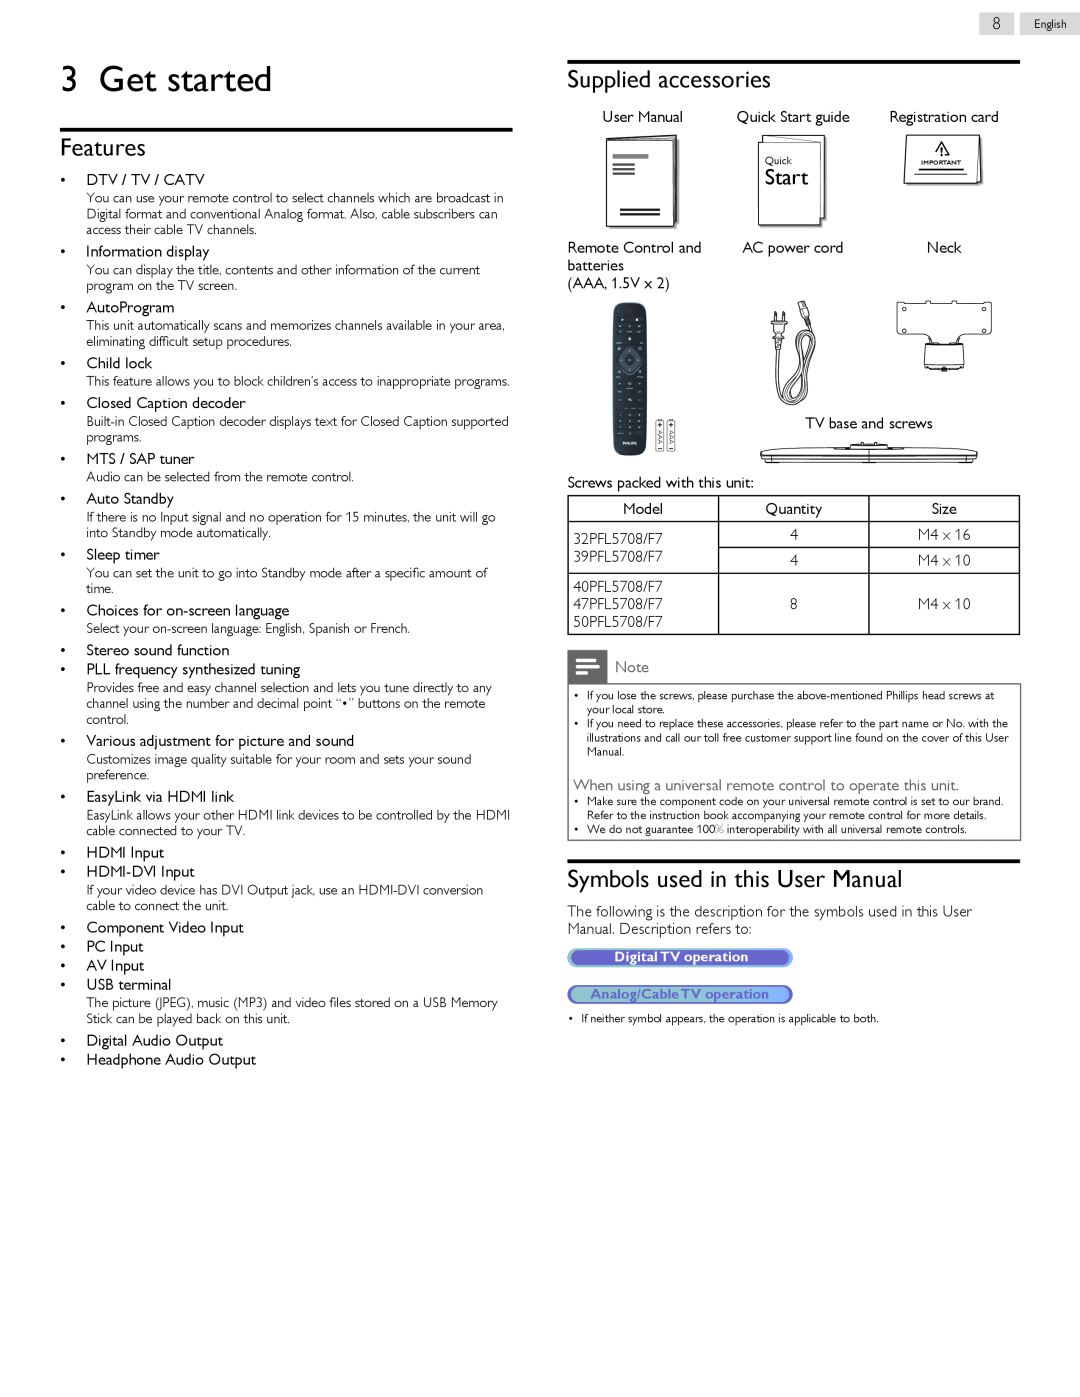 Philips 47PFL5708/F7, 32PFL5708/F7 Get started, Features, Supplied accessories, Symbols used in this User Manual, Start 